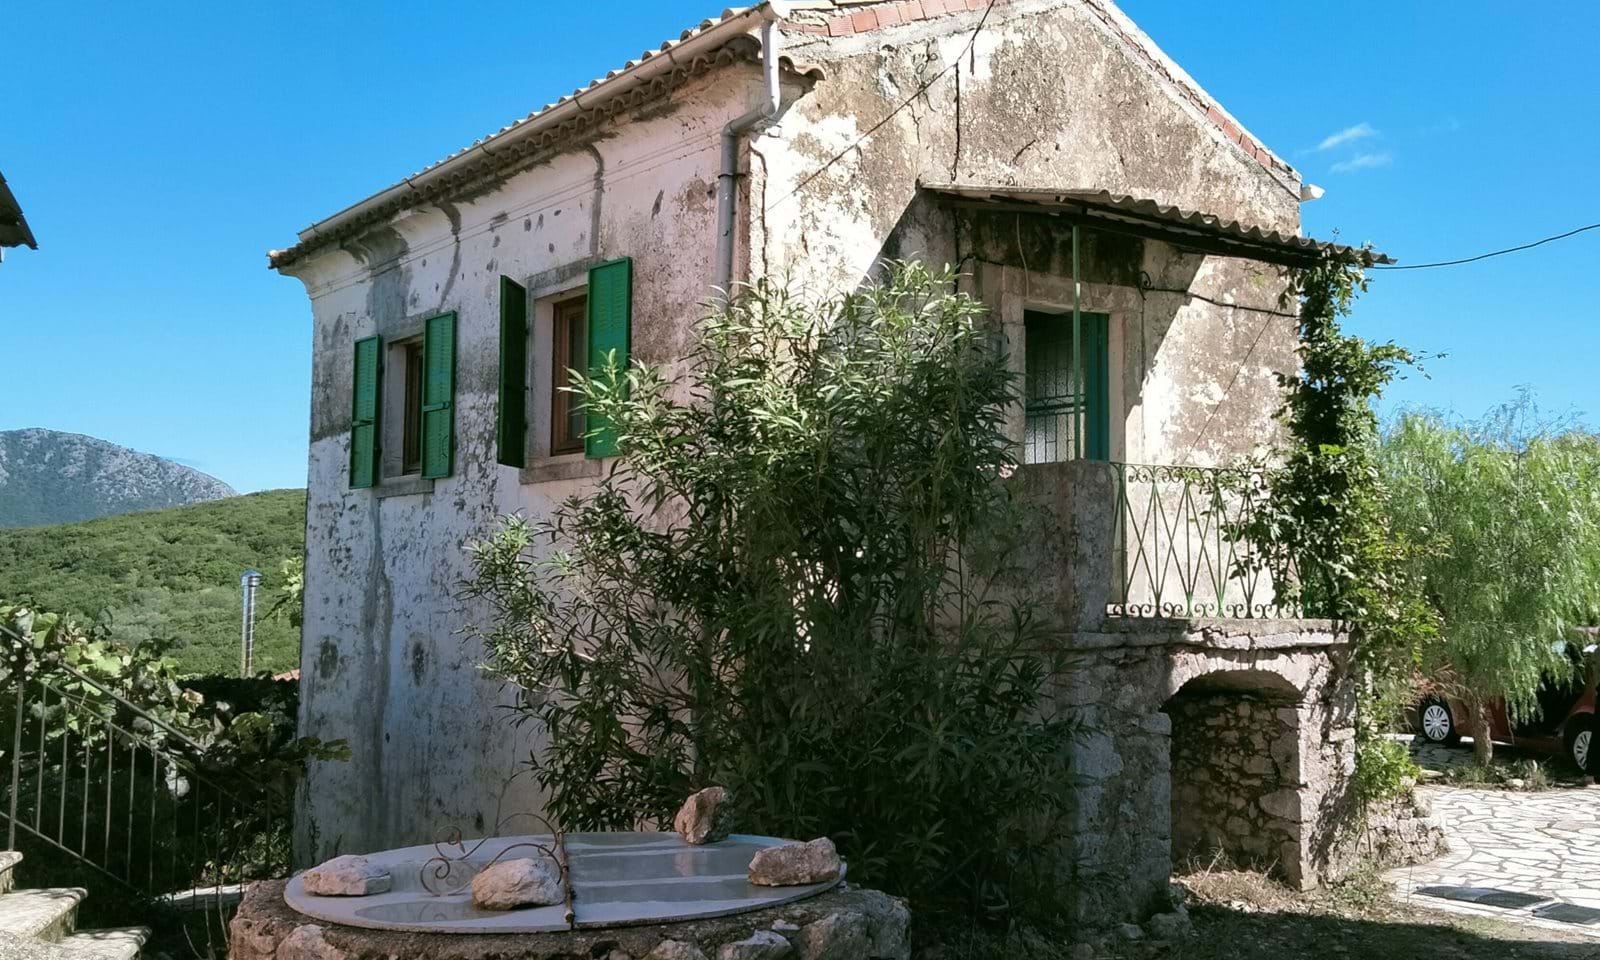 This picturesque two-storey building stands in its own little square within the good company of nice old neighbour houses. The thick stone walls make the house nice and cool in the summer months, and keeps the warmth during the winter. The present owners have refurbished the house with loving care - original elements like the doors and the ceiling and floors of cypress-wood have been preserved. A new roof was added in 2016. The property still needs work, allowing a feature owner to add their own touch to the house.